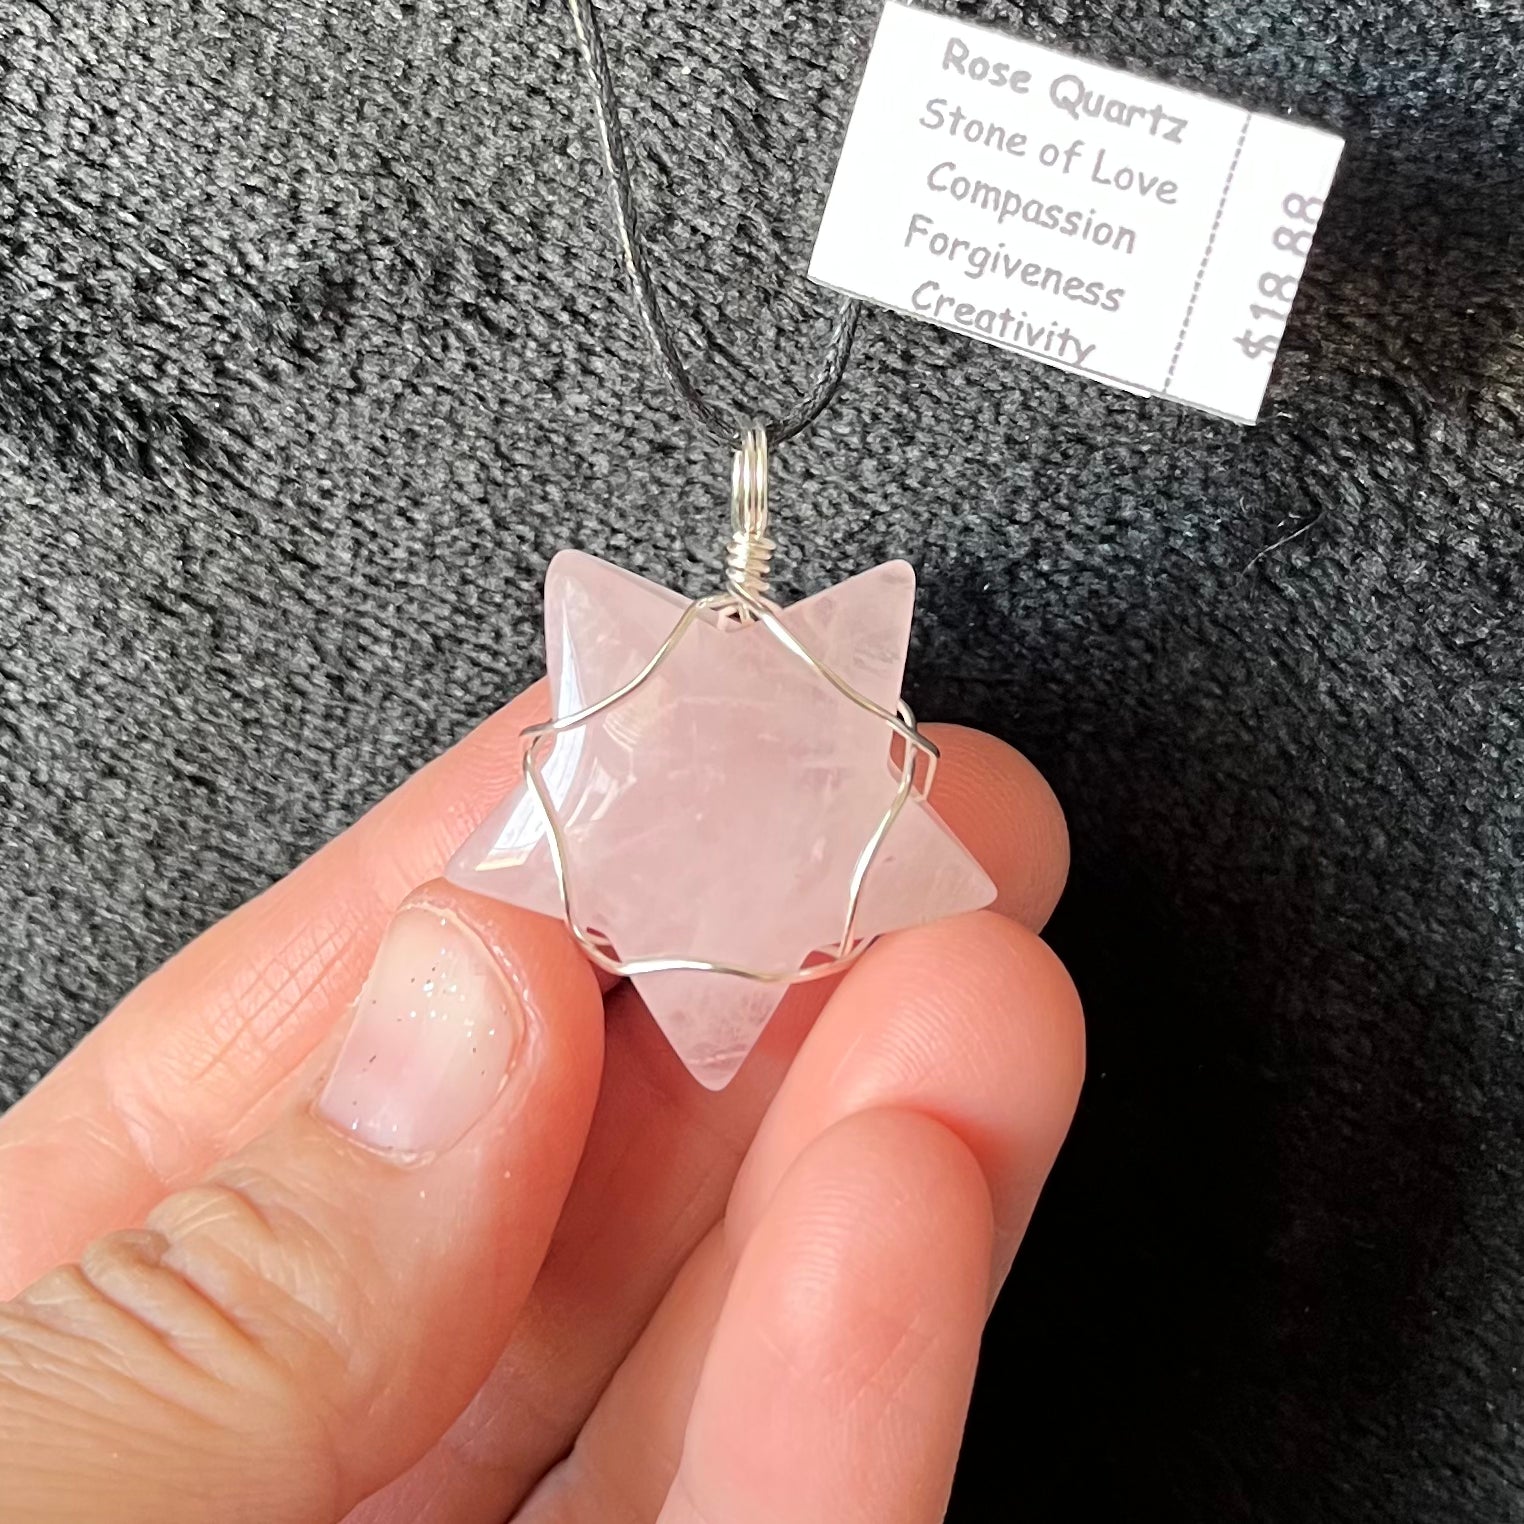 Handcrafted rose quartz star wire wrapped necklace, showcasing the delicate beauty of natural gemstones and skilled craftsmanship.  pendant is approximately 1" long and  attarched to an adjustable black cord.